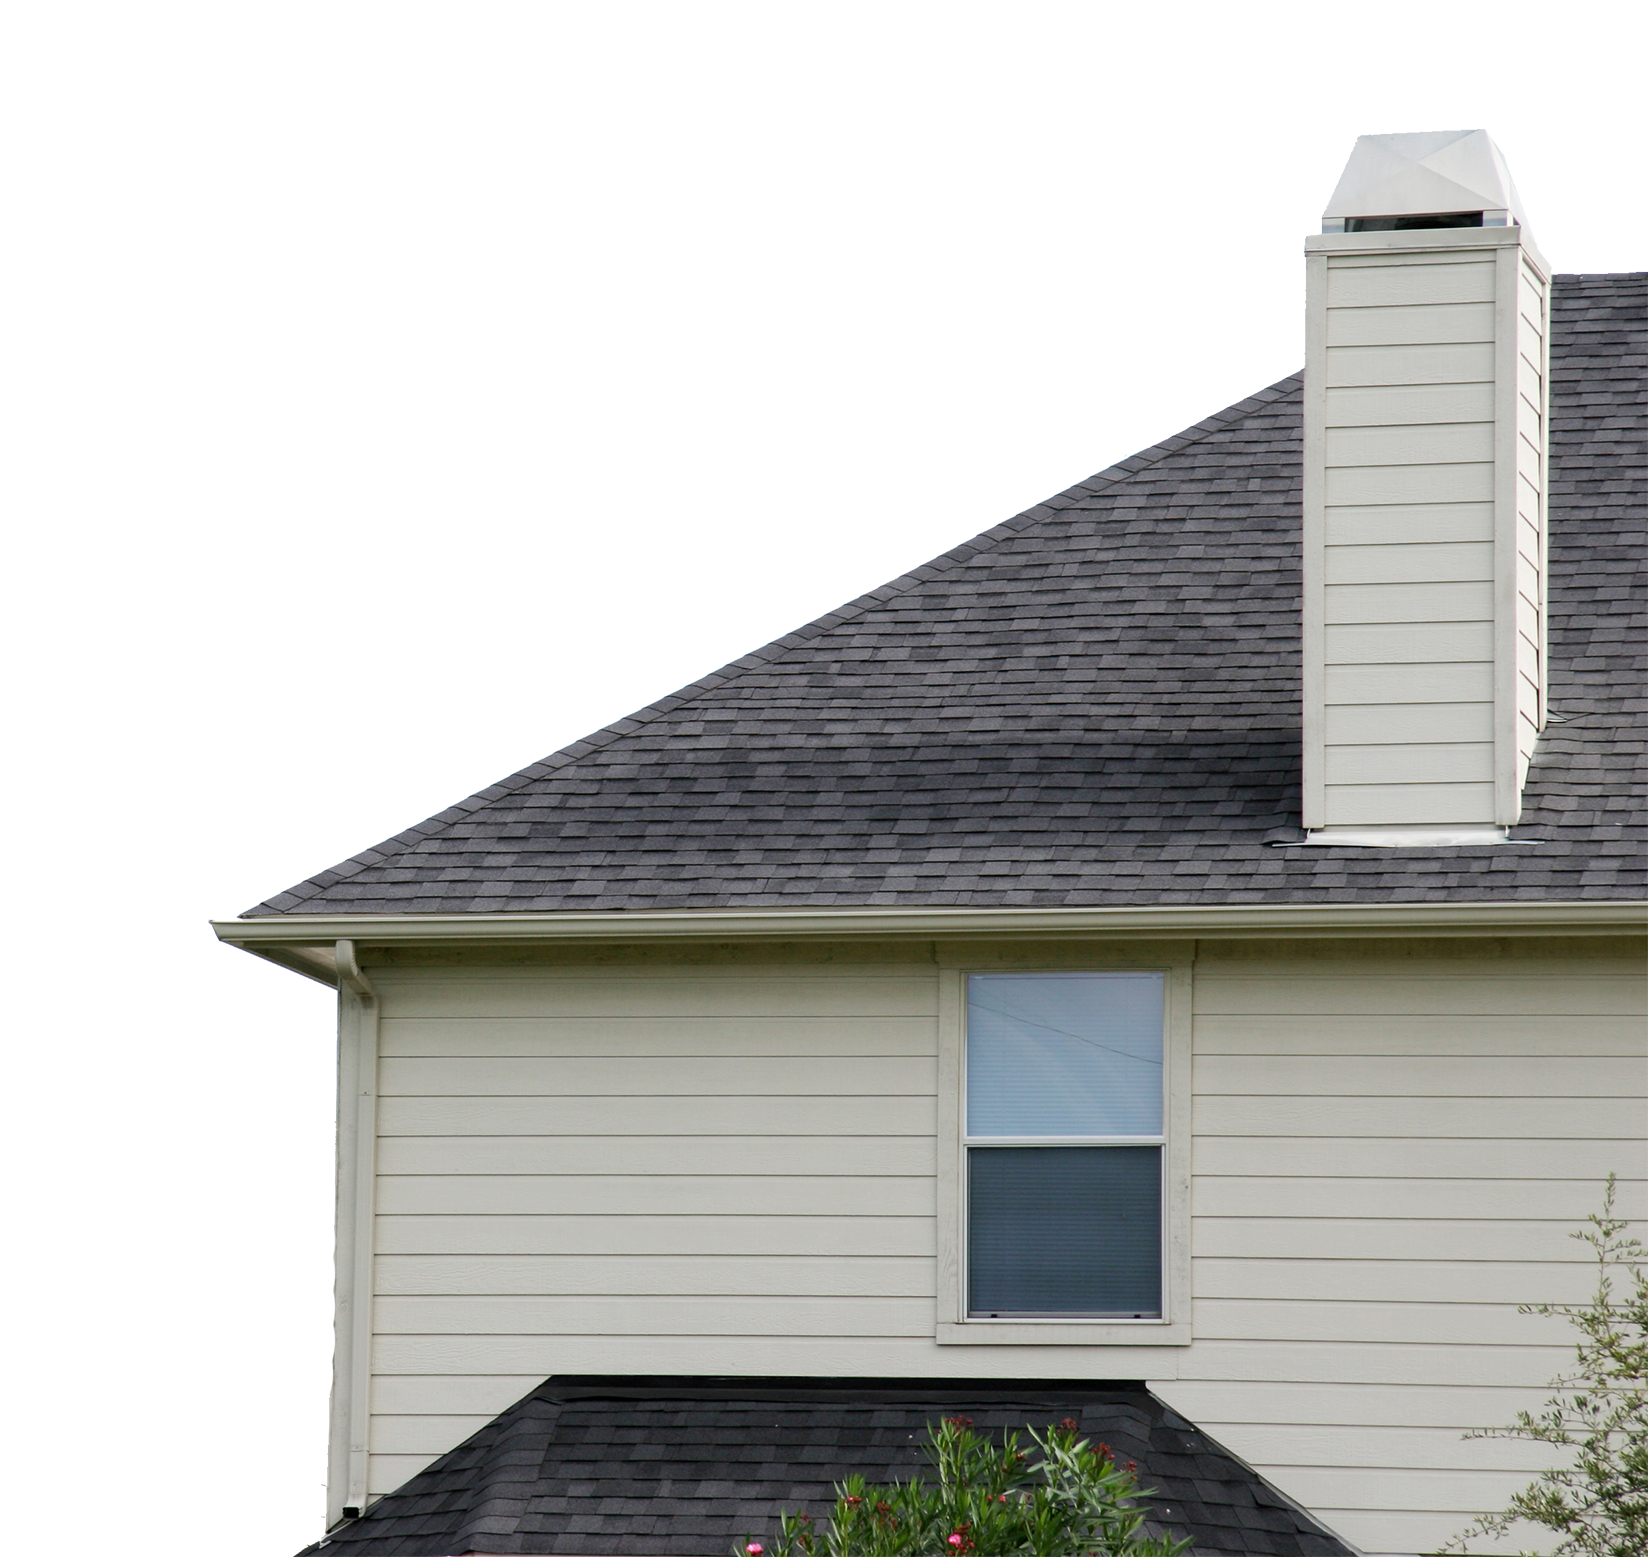 Roofing Services in Roofline Property Services in Newtownabbey & Bangor